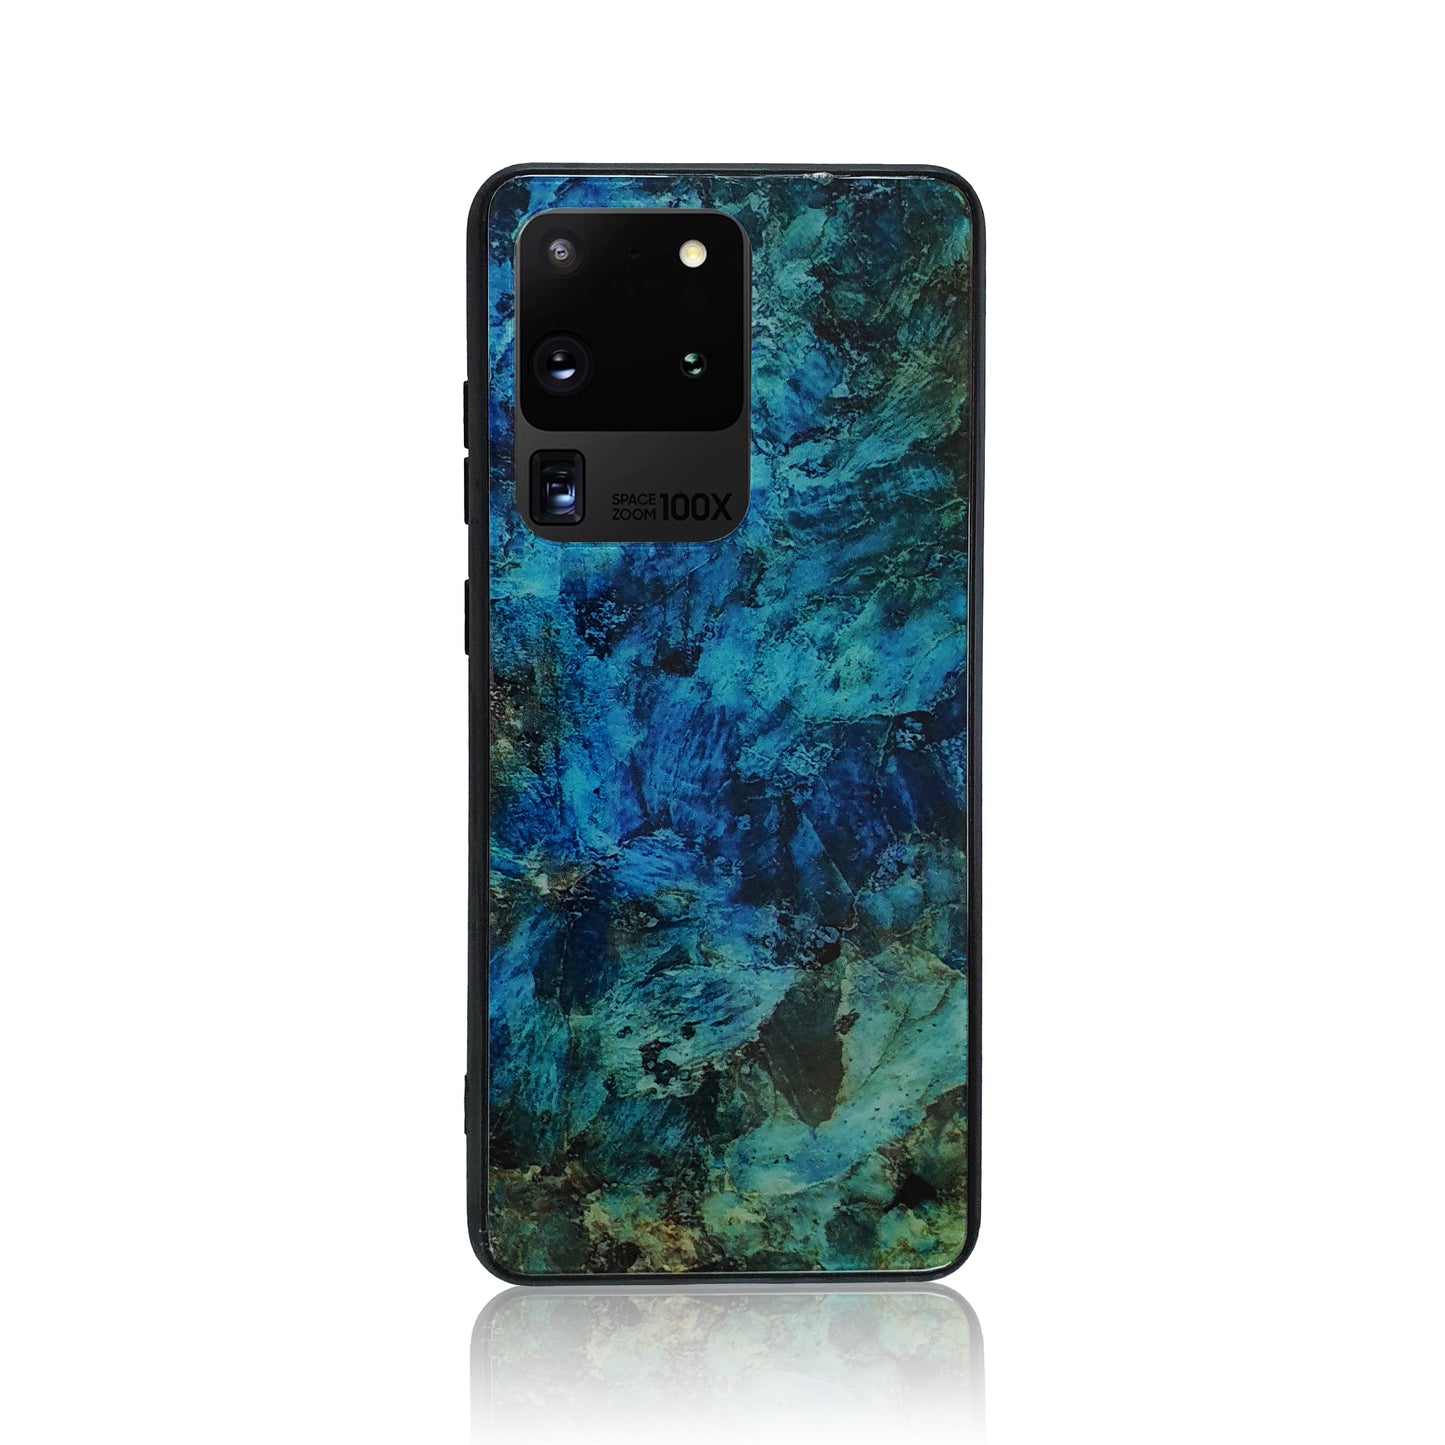 Black and Blue Tempered Glass Samsung Case